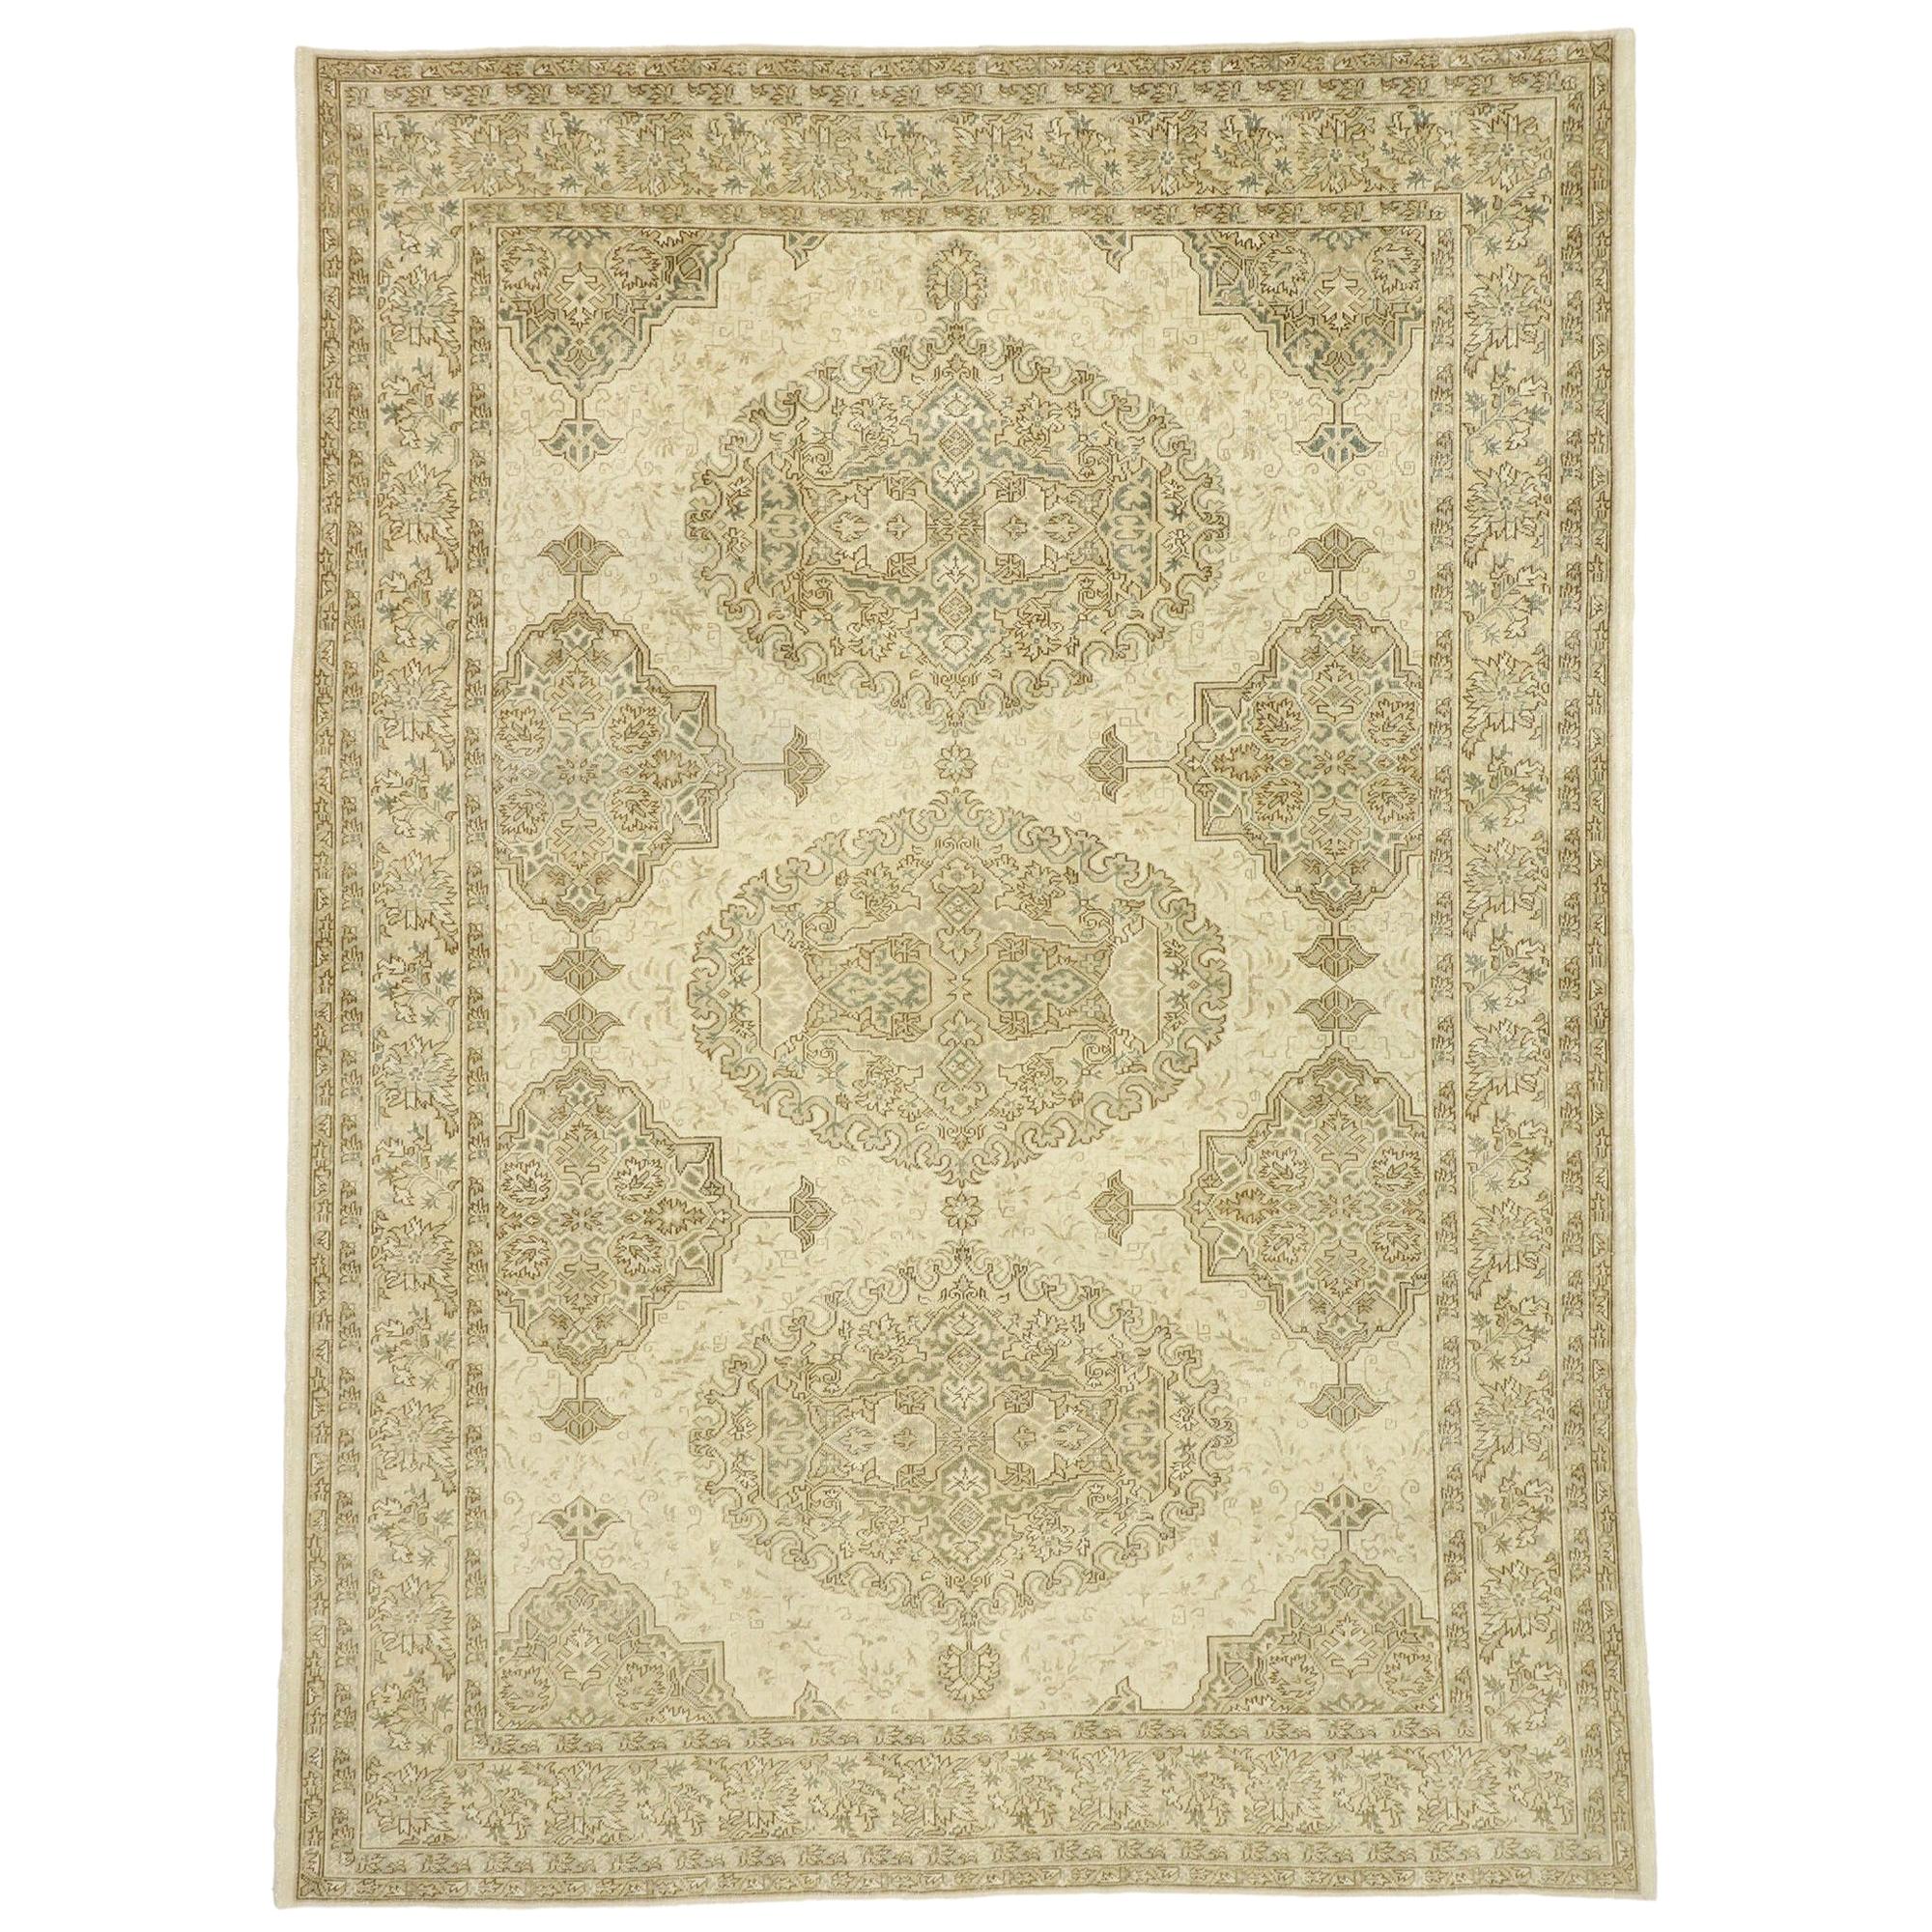 Distressed Vintage Turkish Sivas Rug with Rustic William and Mary Style